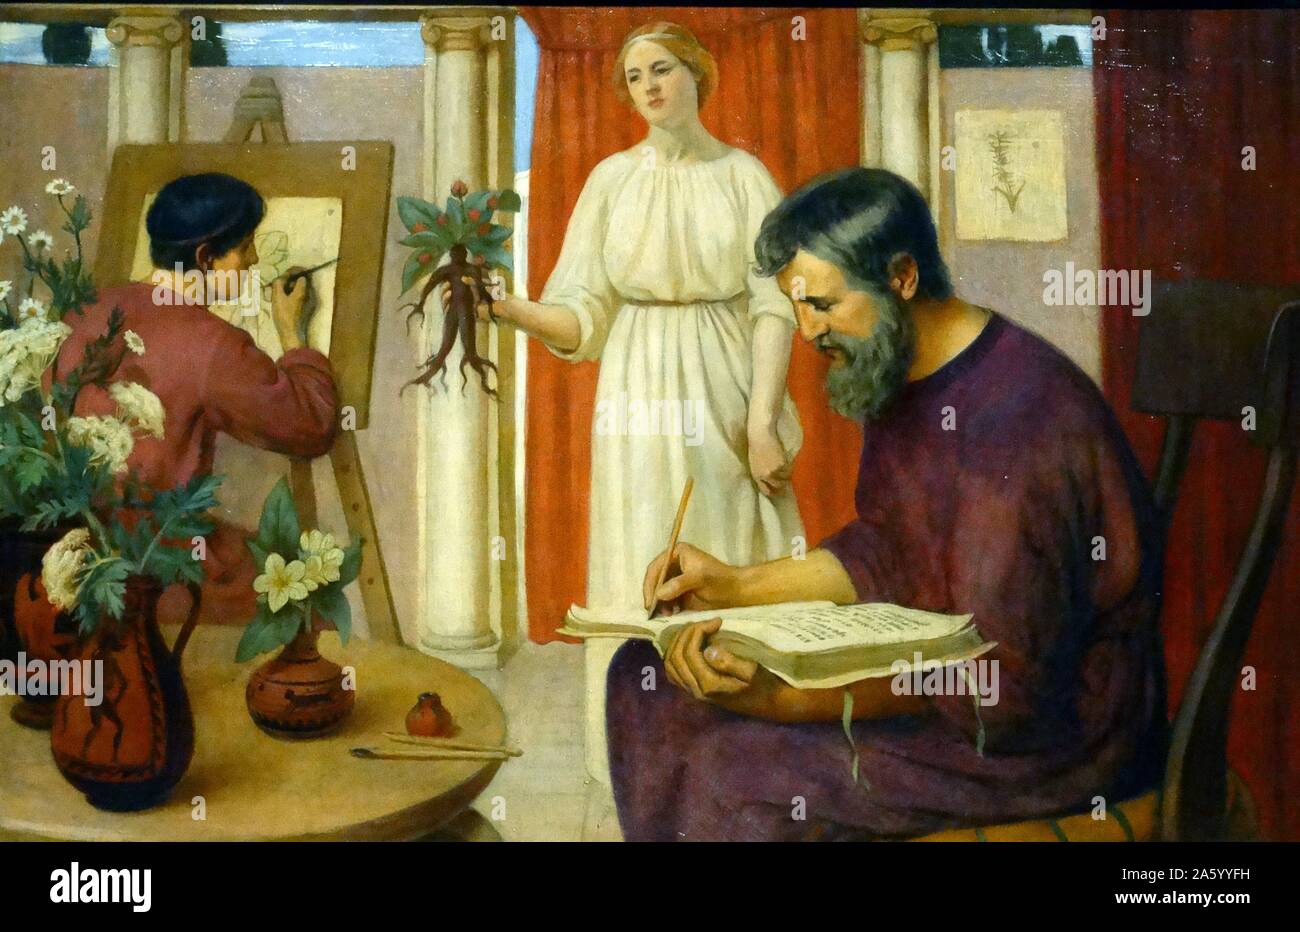 Dioscorides Describing the Mandrake' by Ernest Board (1877-1934). Oil on canvas, 1909. Dioscorides was a botanist, physician and pharmacologist who practiced during the time of Nero. Stock Photo